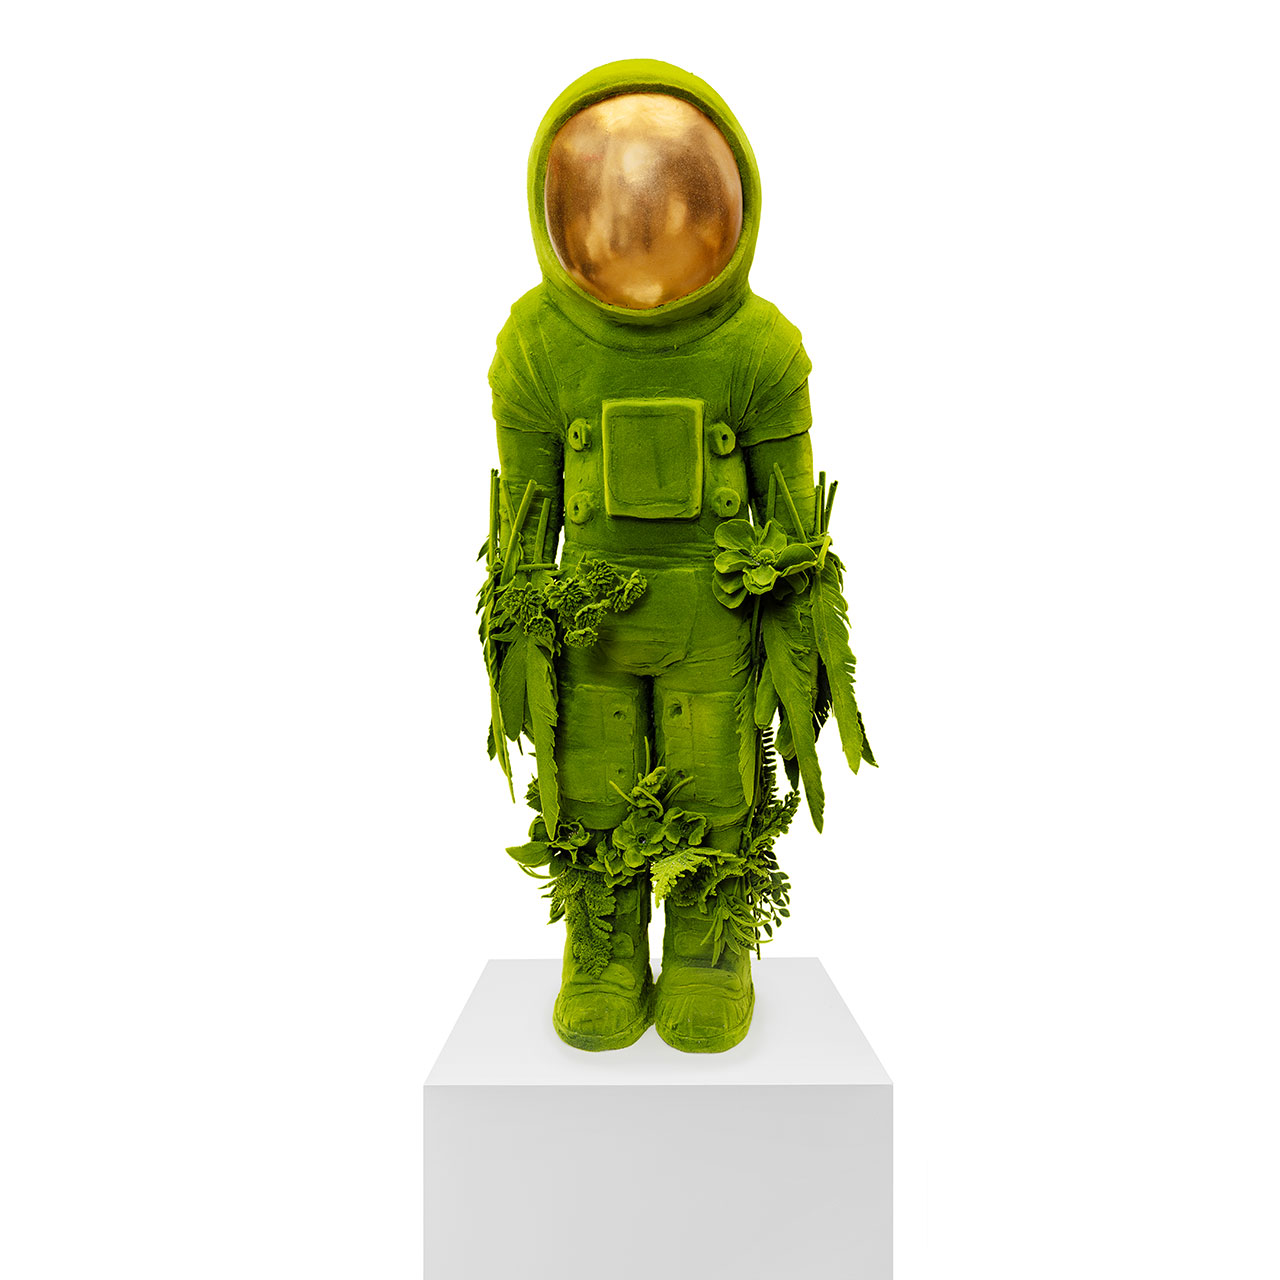 Kim Simonsson, Astronaut in Camouflage, 2022. Stoneware, gold luster, epoxy resin, nylon fibre, and found objects. Photography courtesy of Jason Jacques Gallery and the artist.